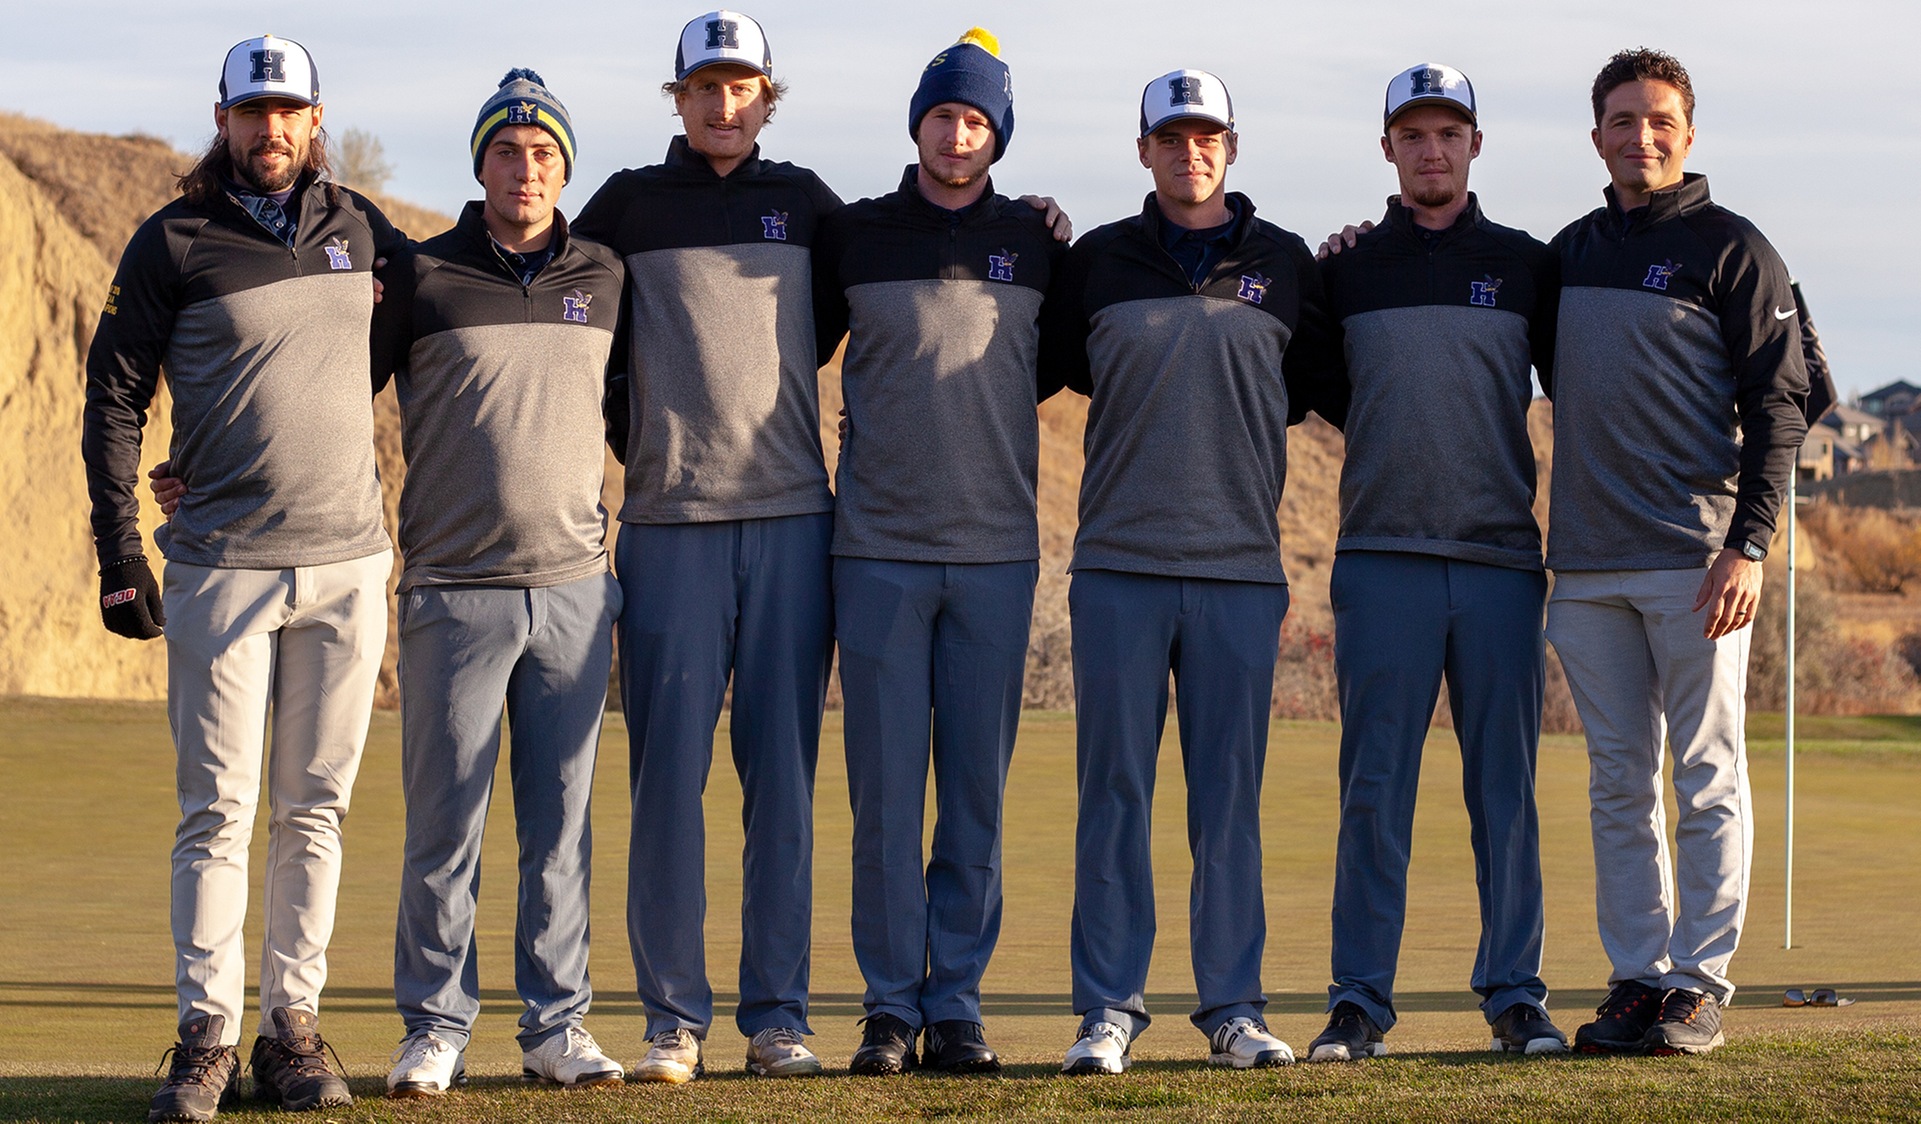 HAWKS MEN SIT ATOP THE TEAM LEADERBOARD AFTER OPENING DAY AT CCAA NATIONALS